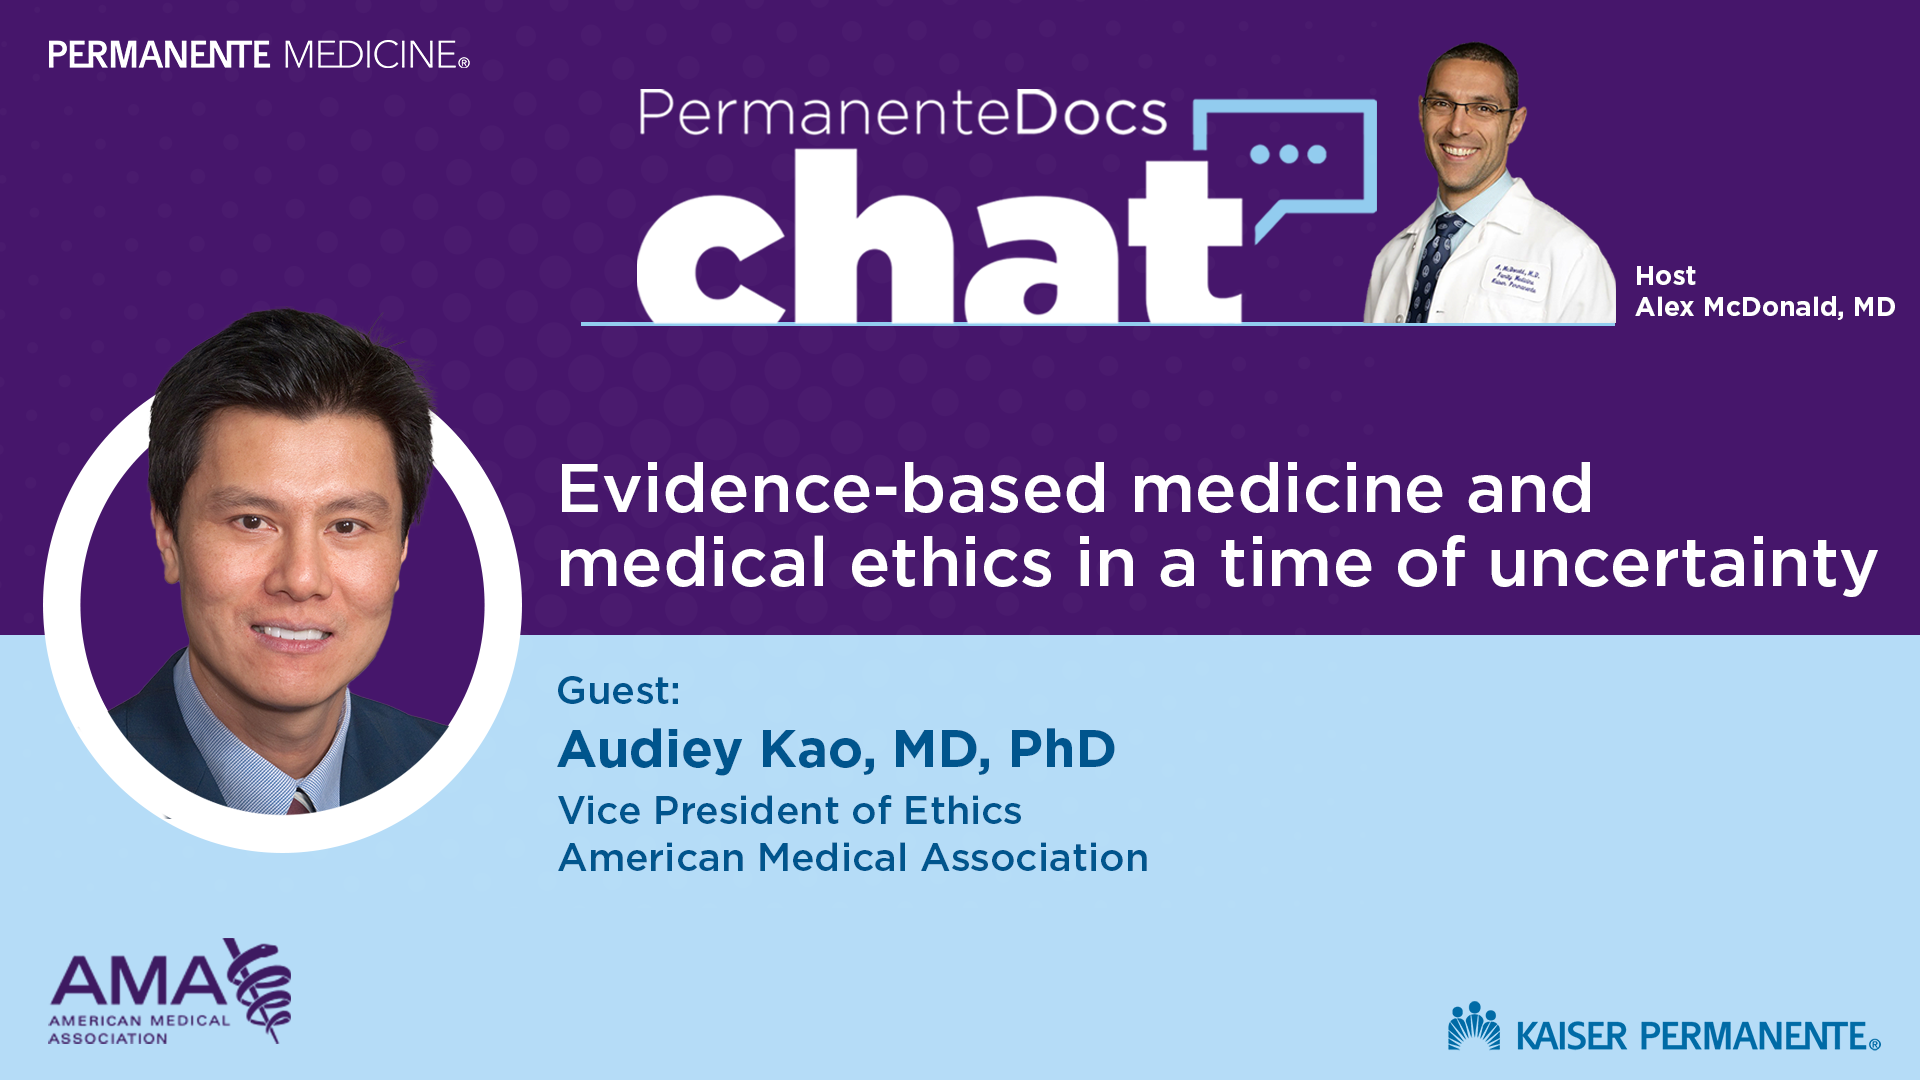 The intersection of medical ethics and evidence-based medicine